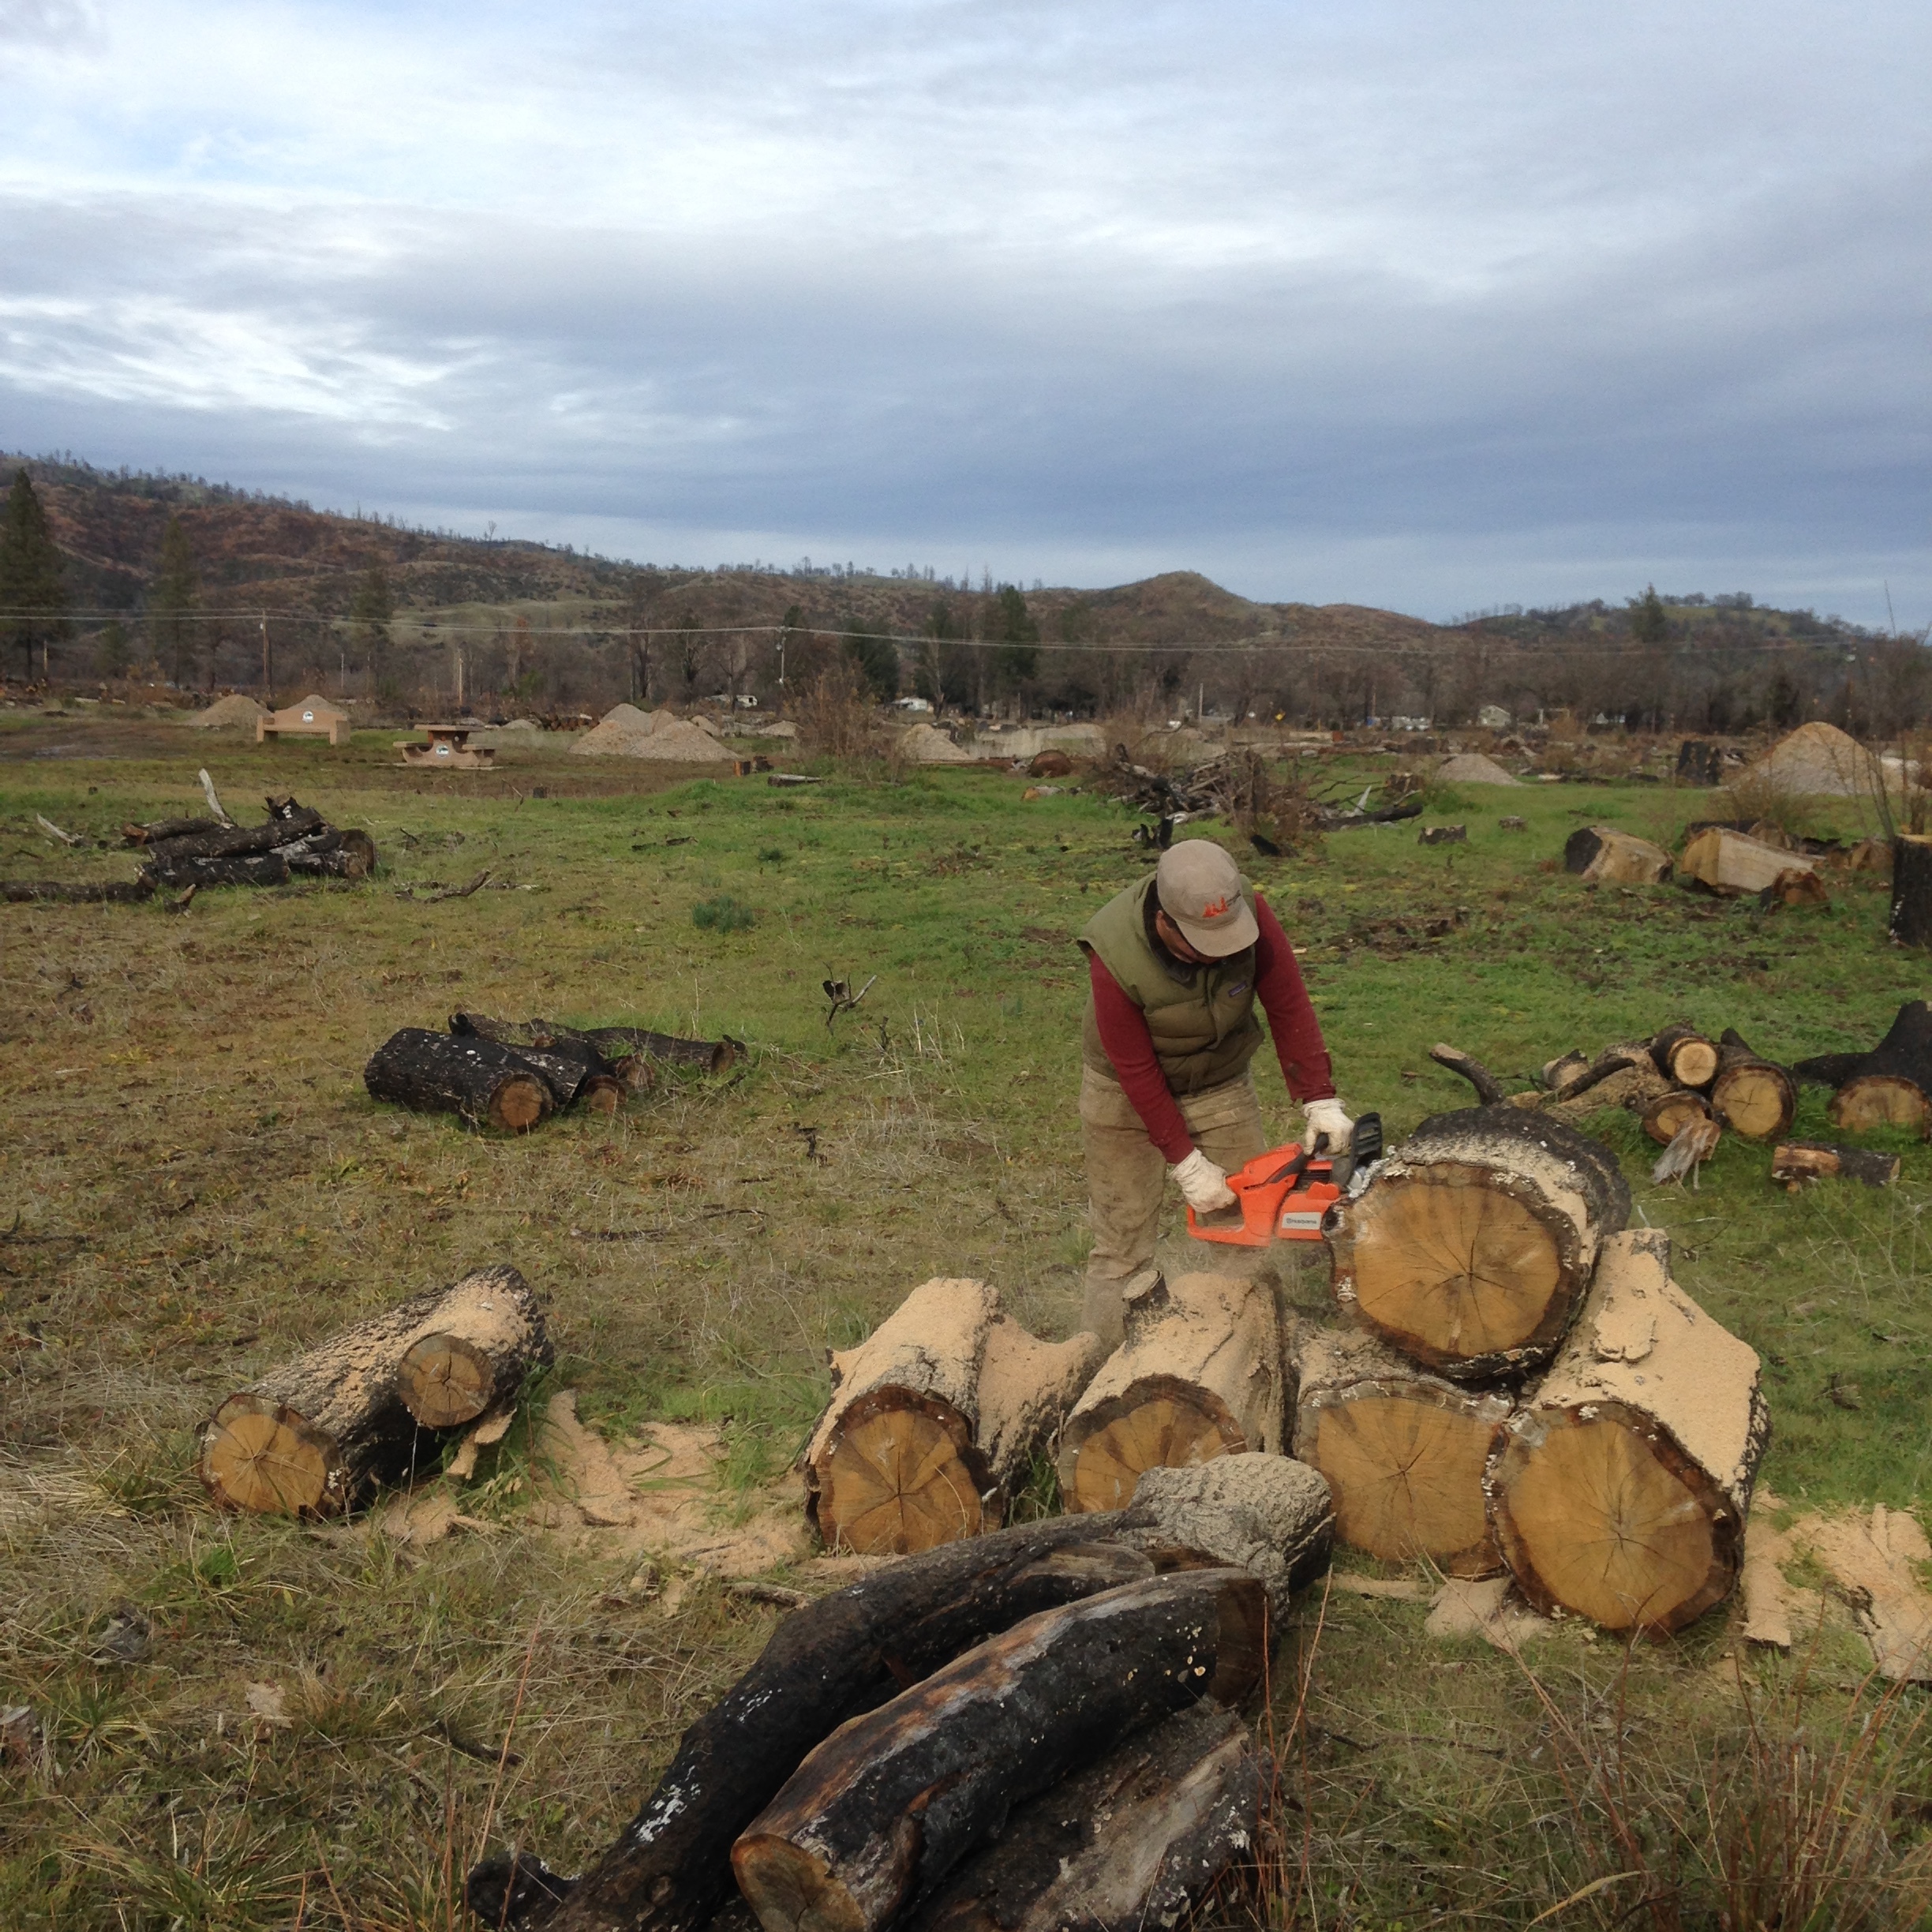 Shasta Krueger cutting up oak that was burned in the Sawmill fire last year. This wood will be used to heat the resident house, studio and in the kilns